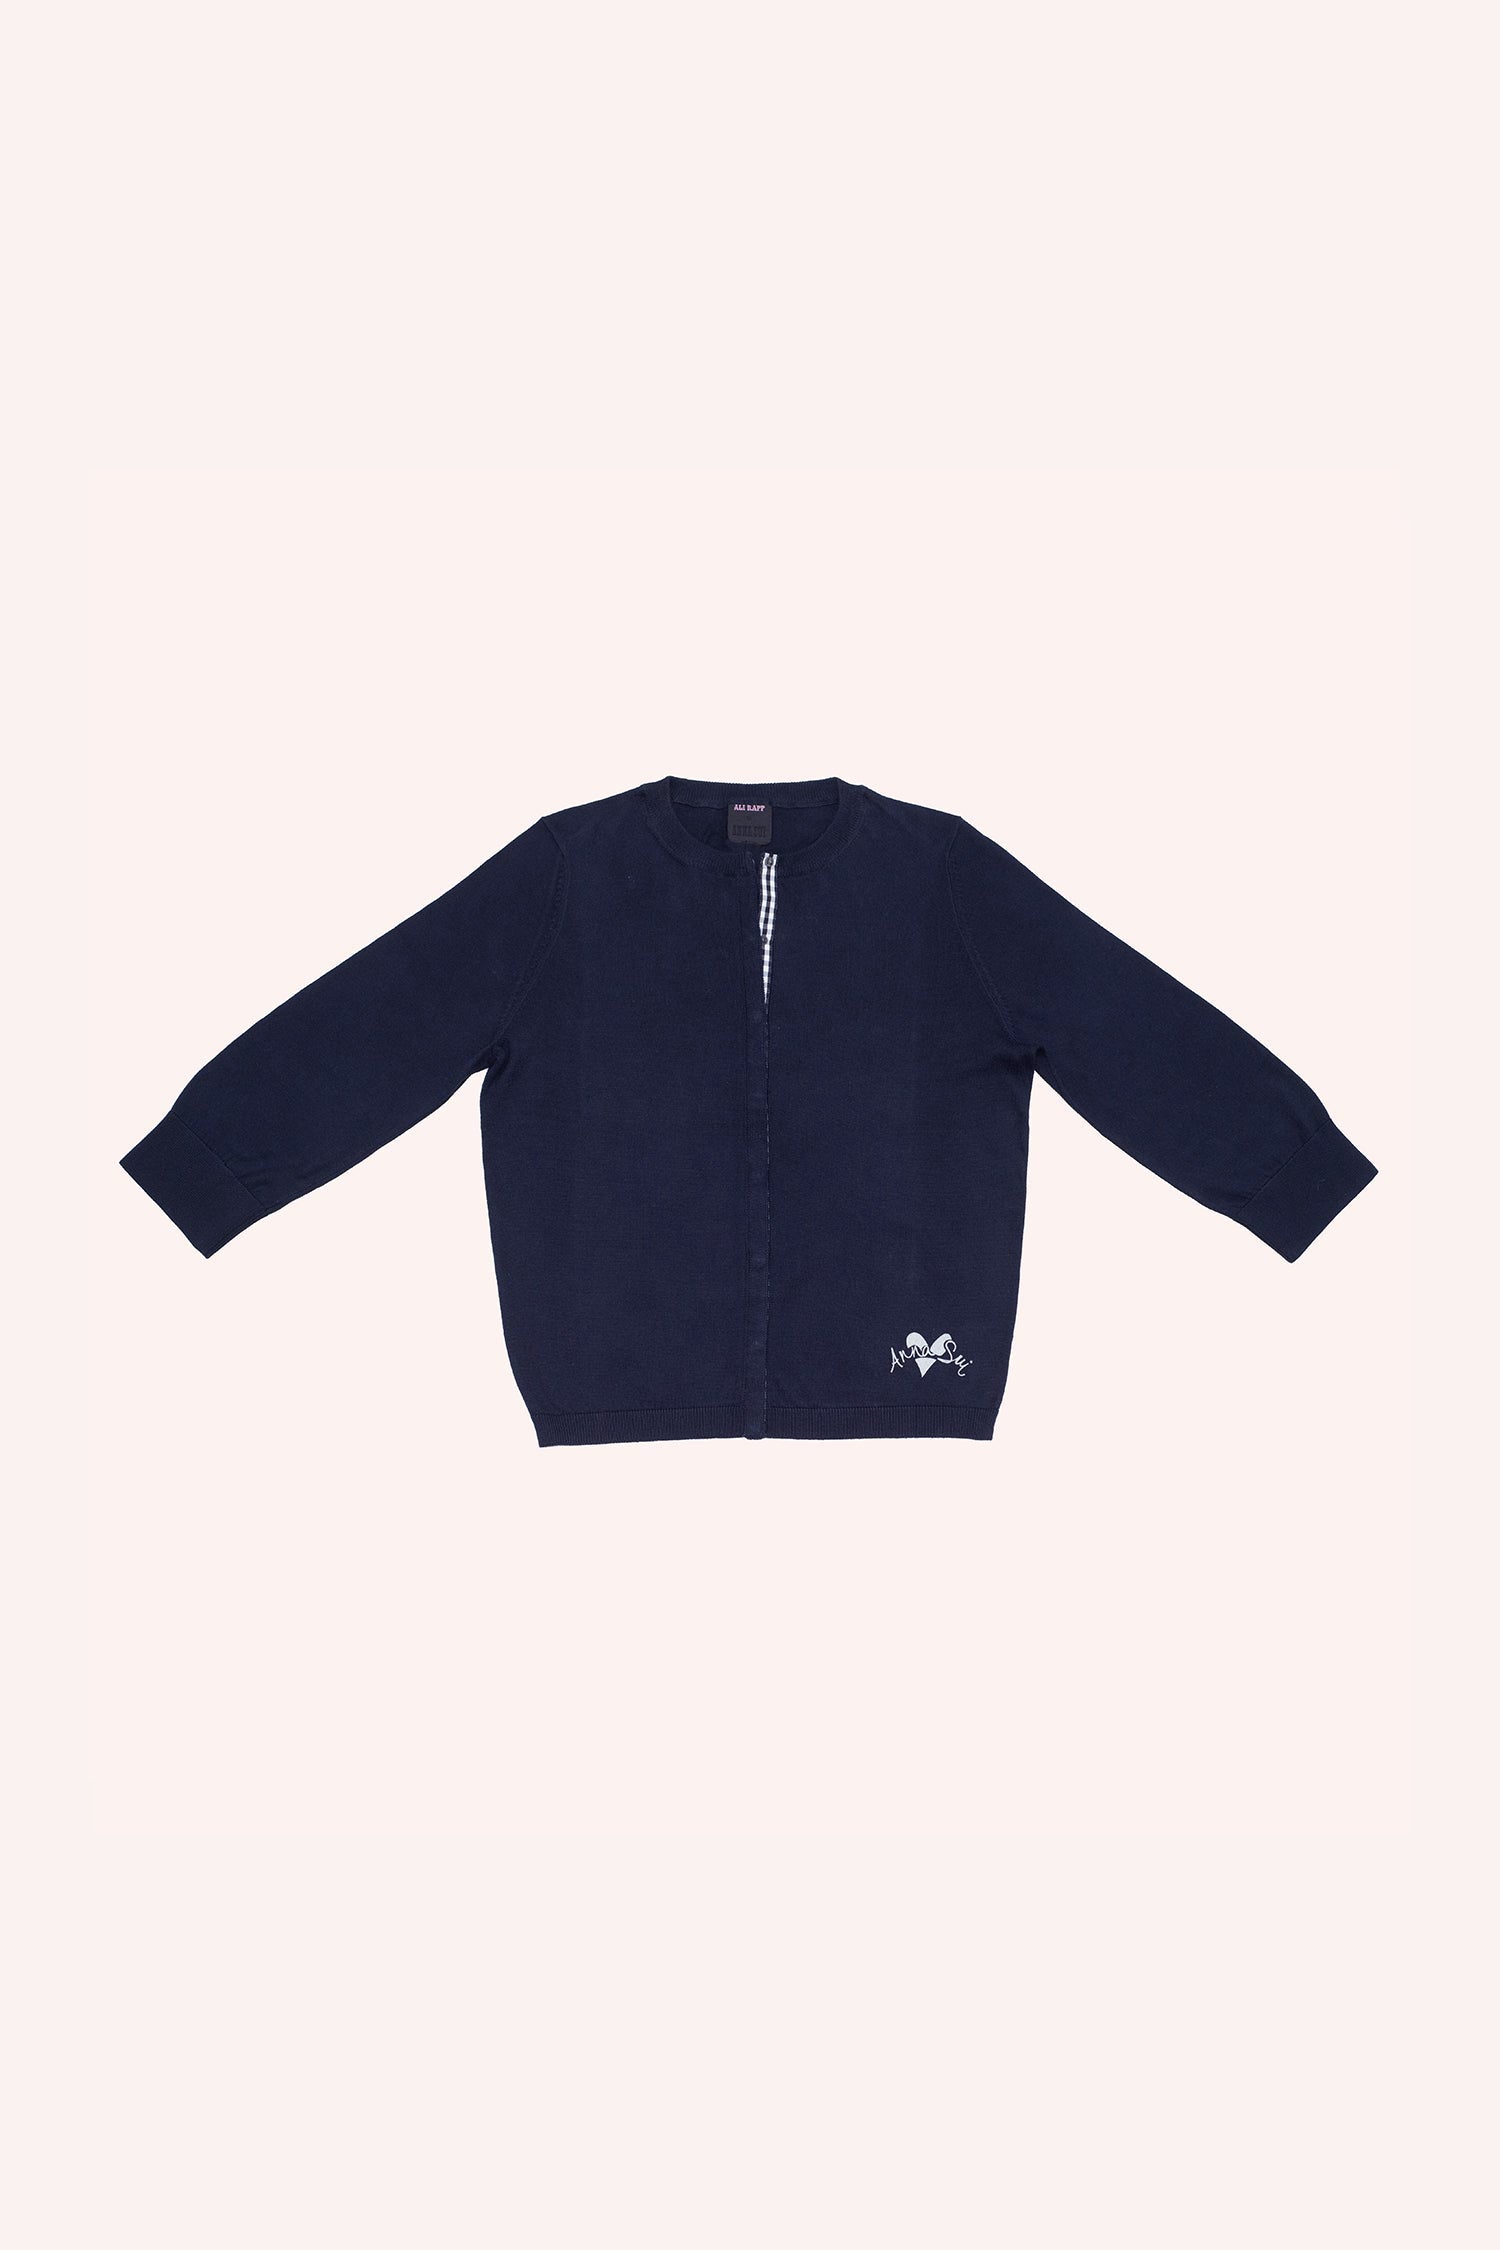 Knit Cardigan Navy, Three-quarter sleeve length, Mini white Anna Sui over a hart, at bottom corner of the front, zipper